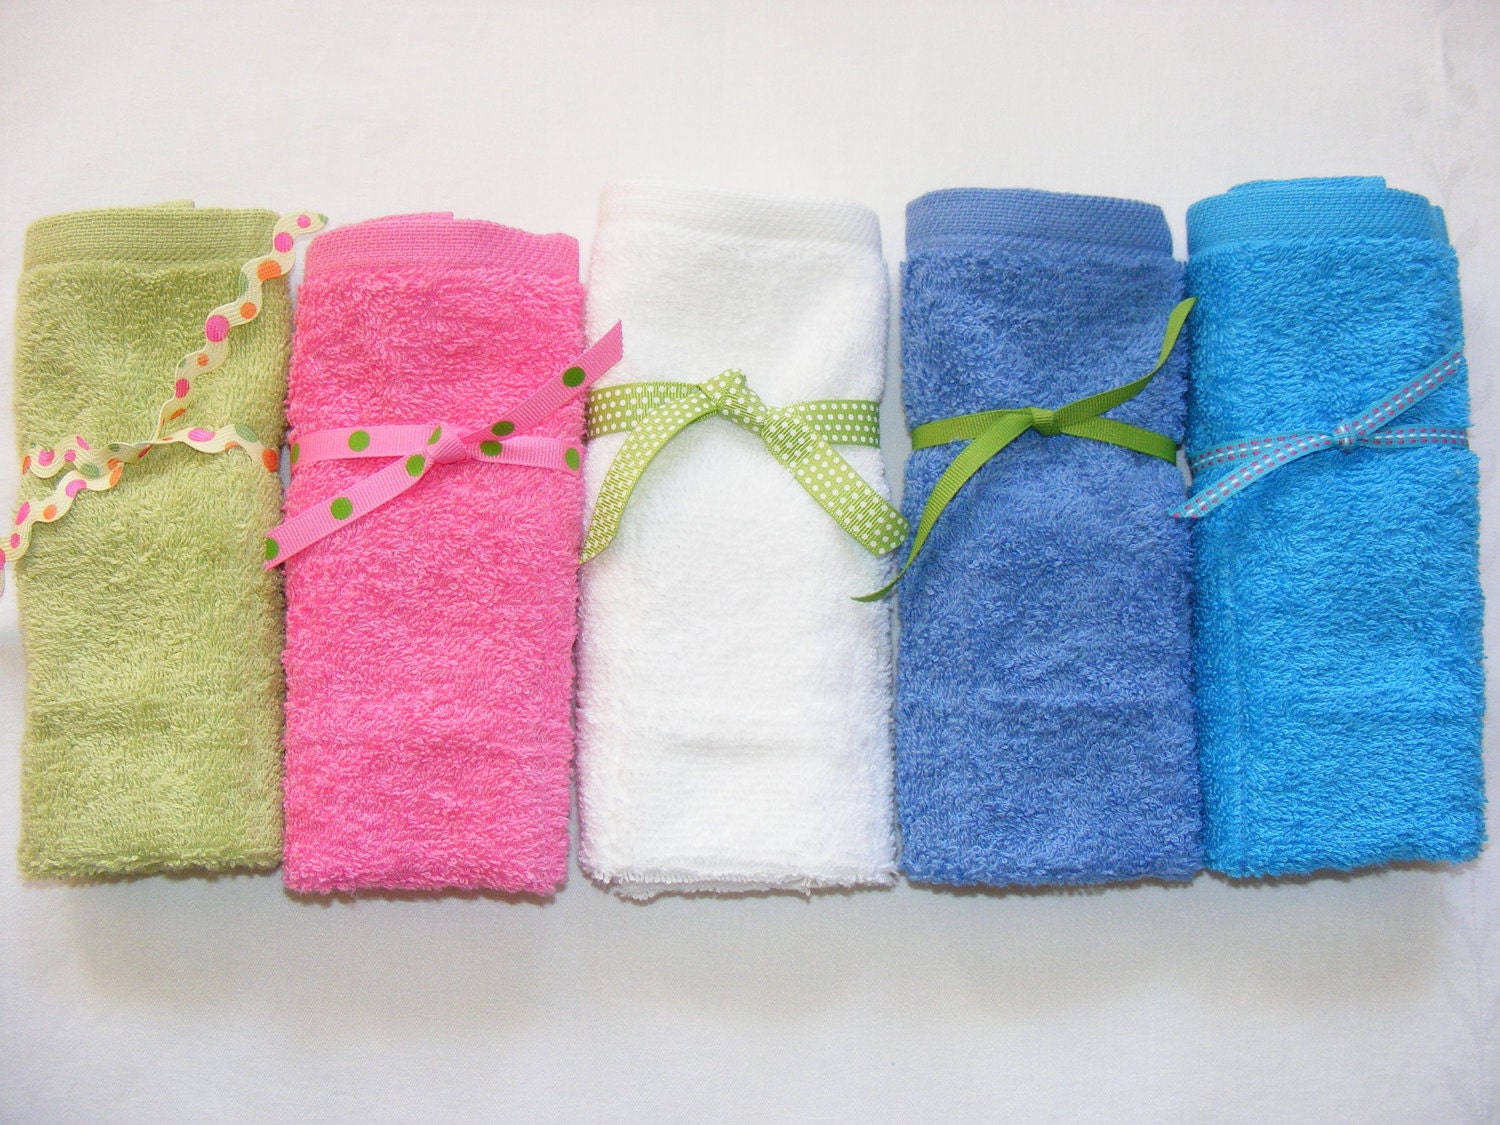 Terrycloth Toothbrush and Paste Travel Pouch in Bright Pink...popular little gift....free shipping